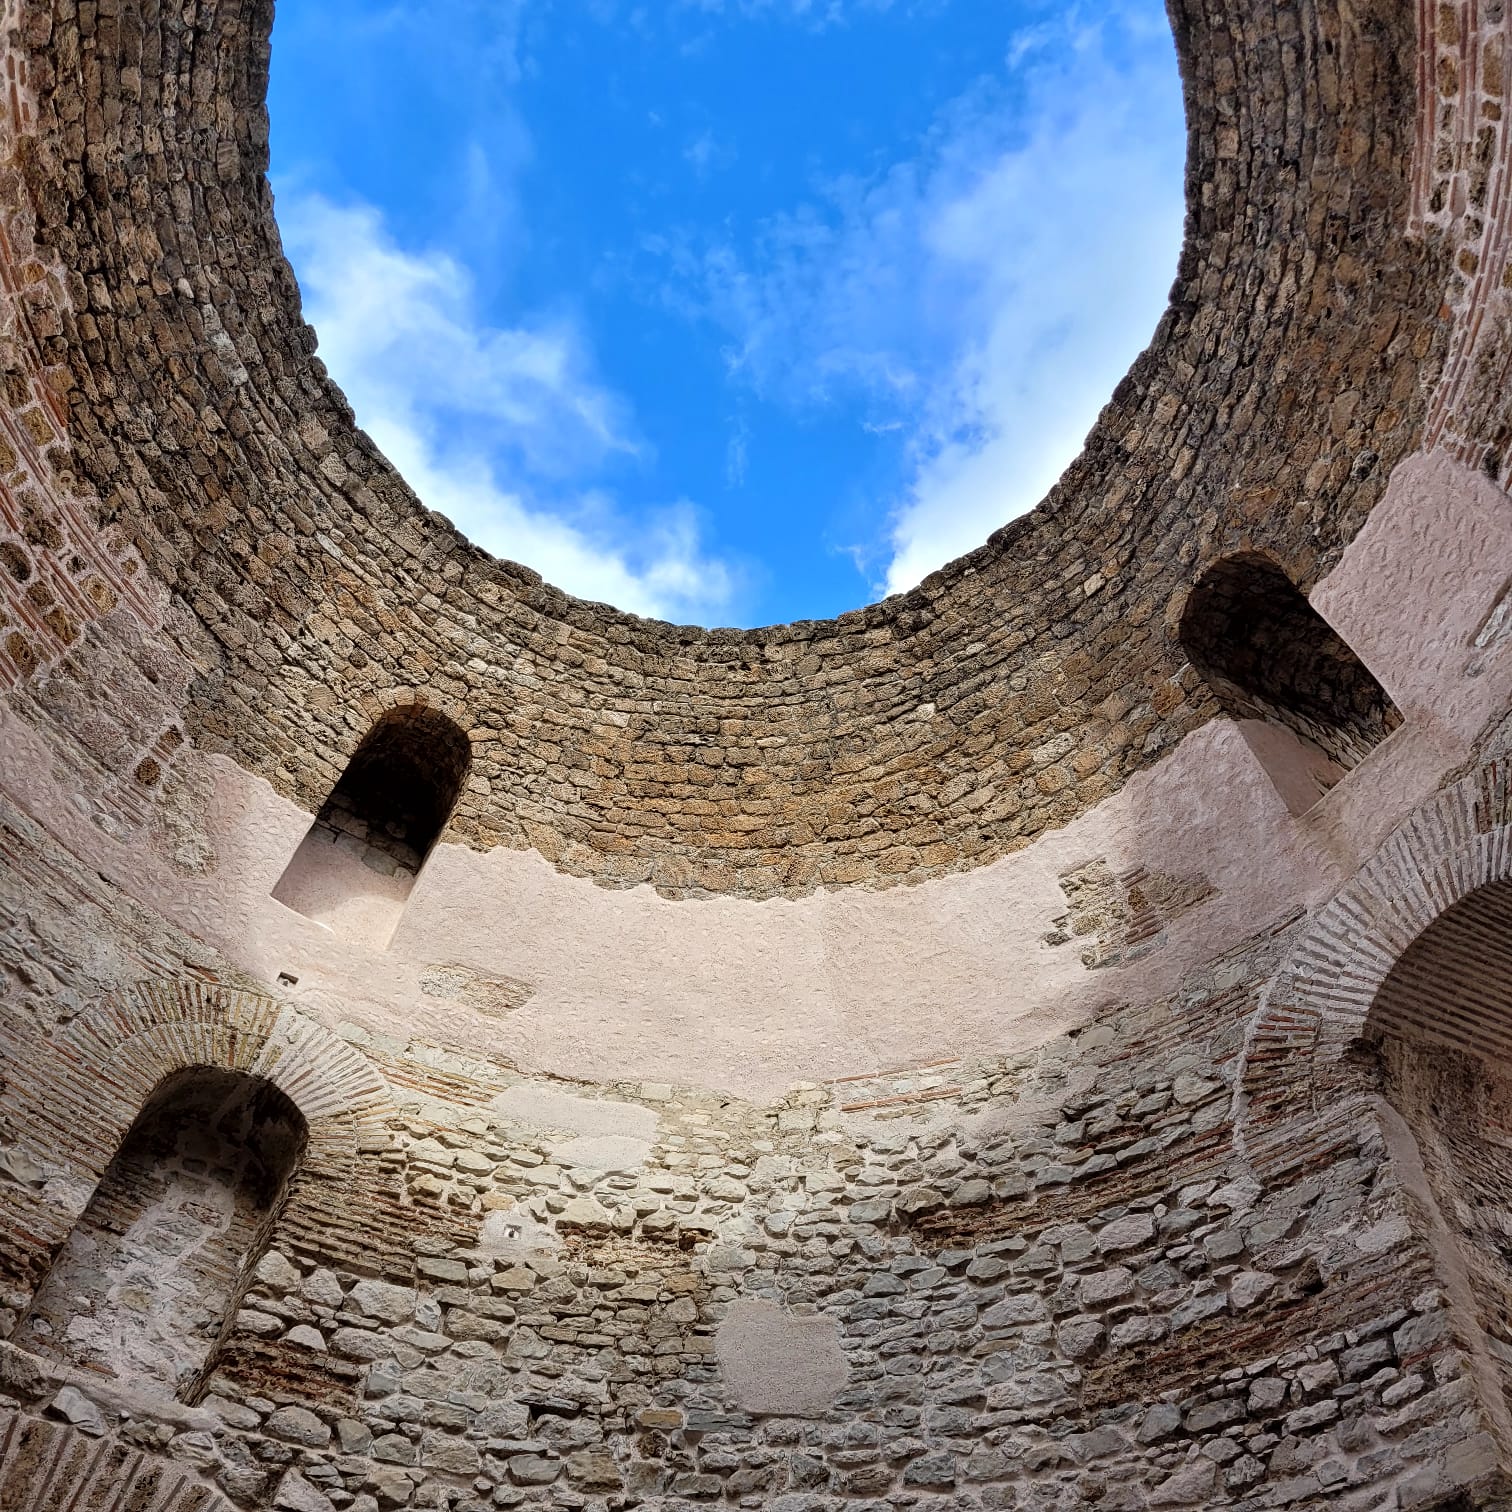 Real traveller photo from inside Diocletian’s Palace